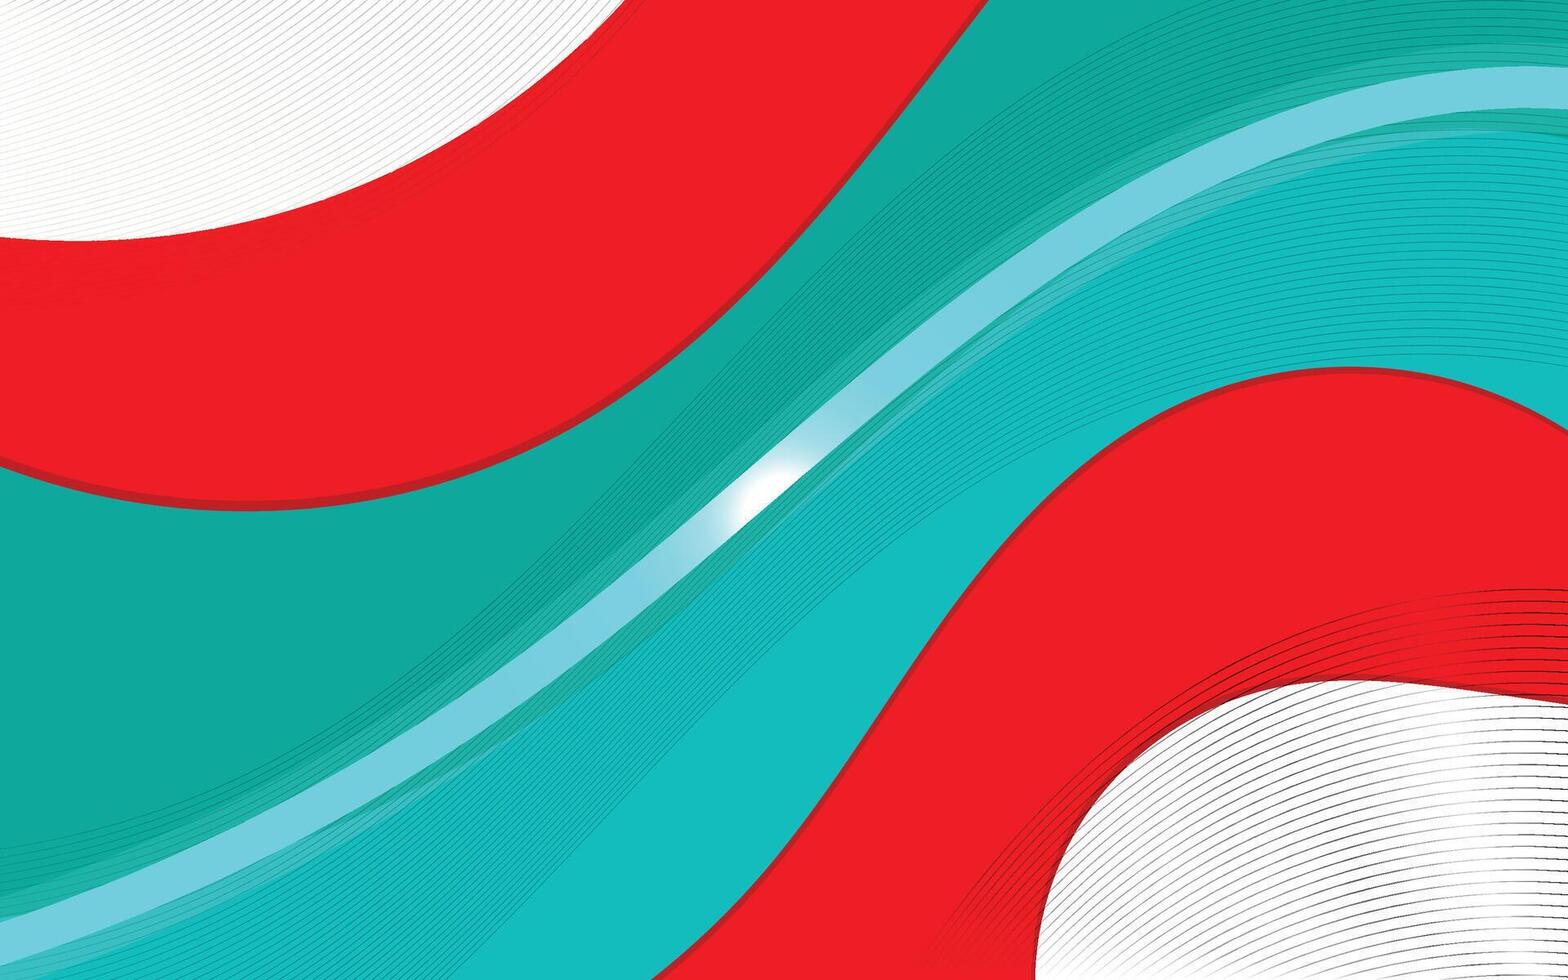 Abstract red and white wave background design for banner,poster,flyer etc vector